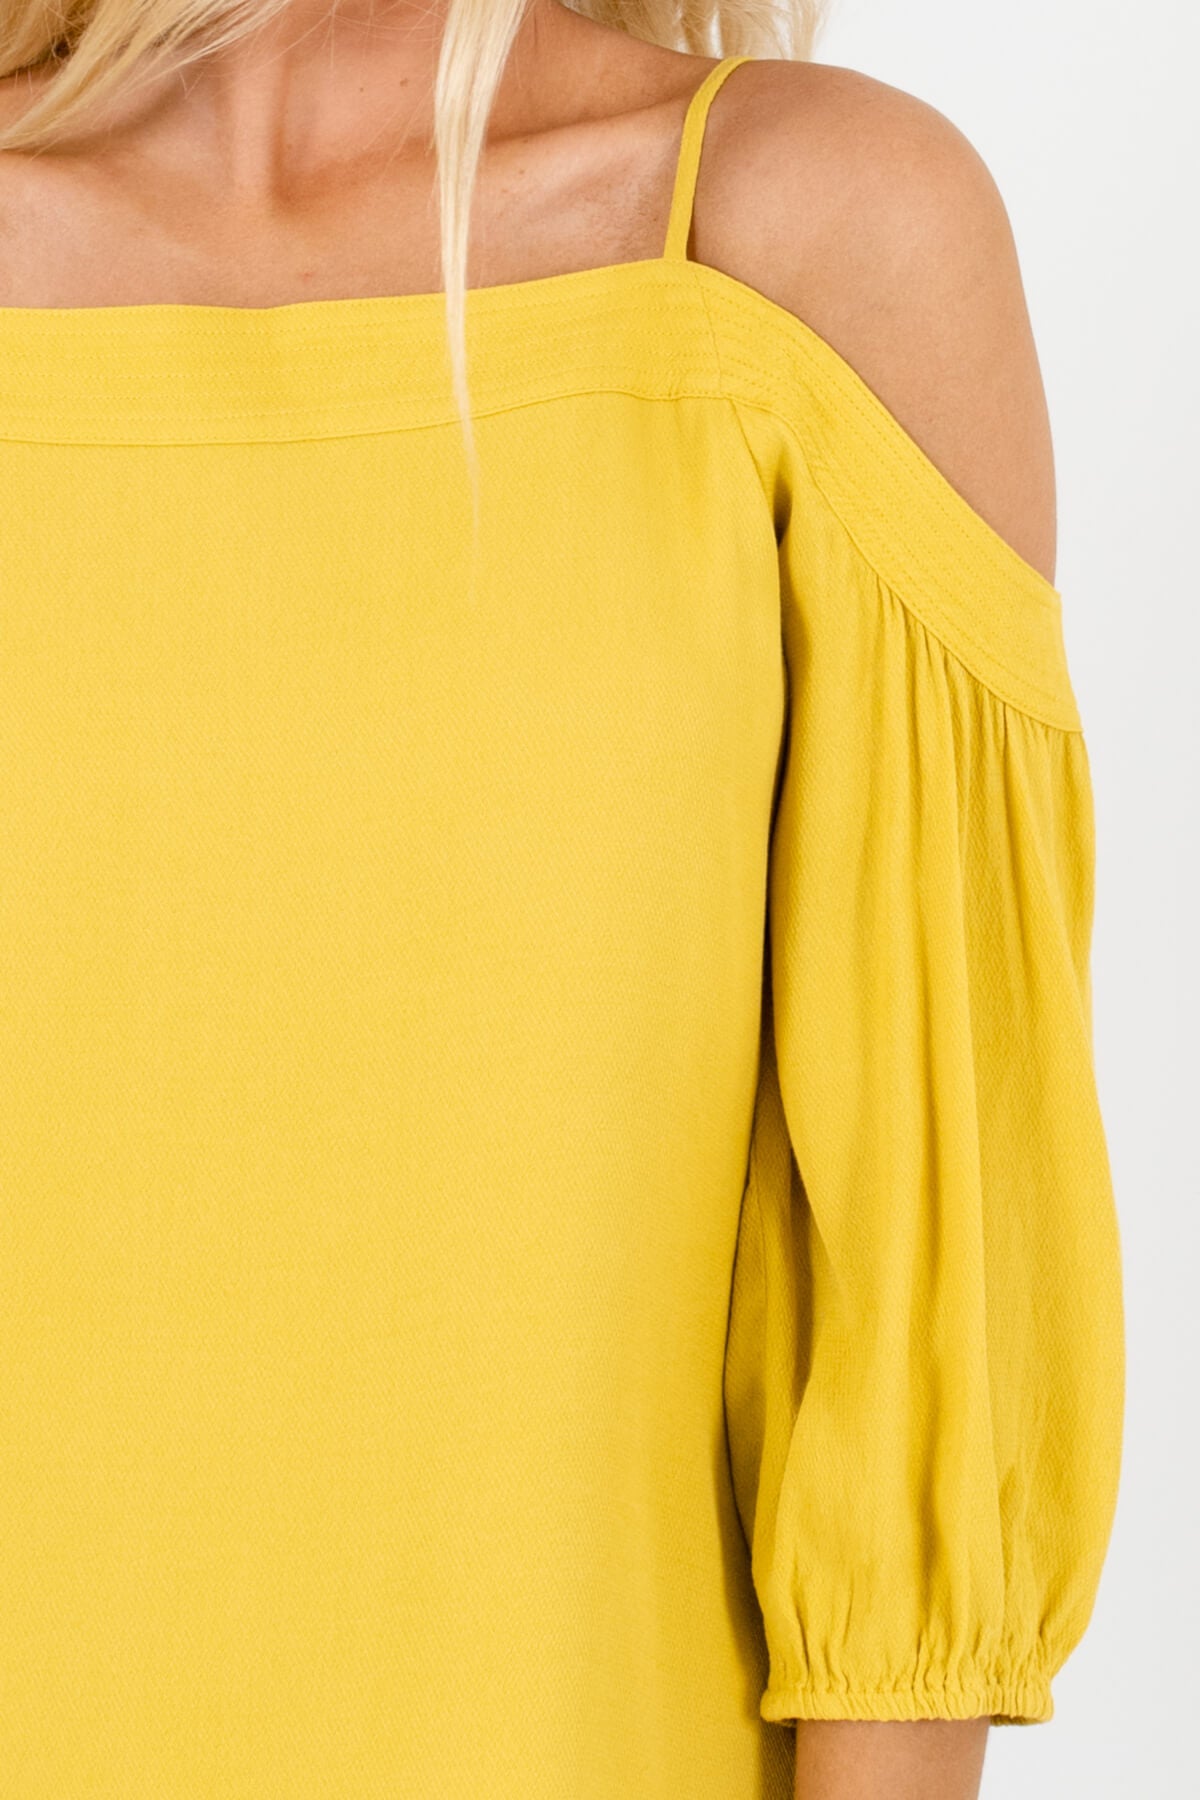 Yellow Affordable Online Boutique Clothing for Women